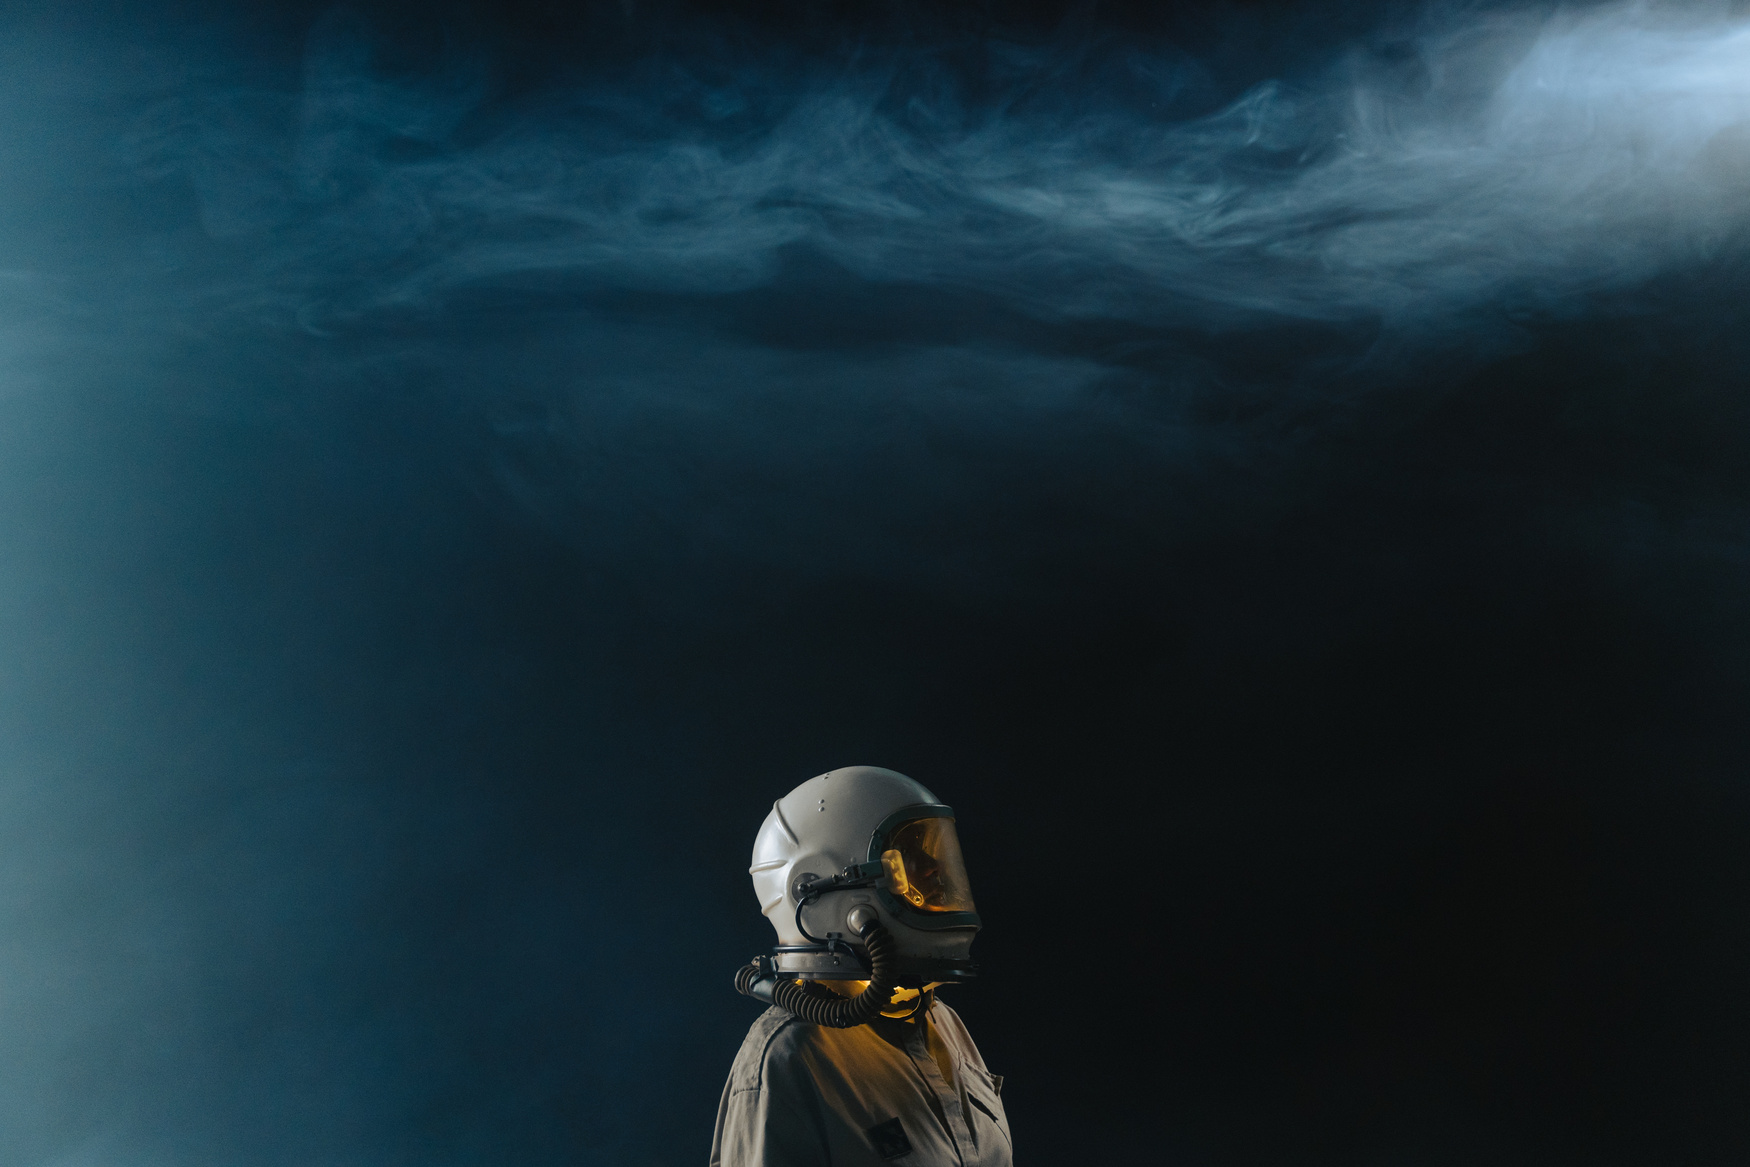 Person Wearing Space Suit and Helmet in Outerspace